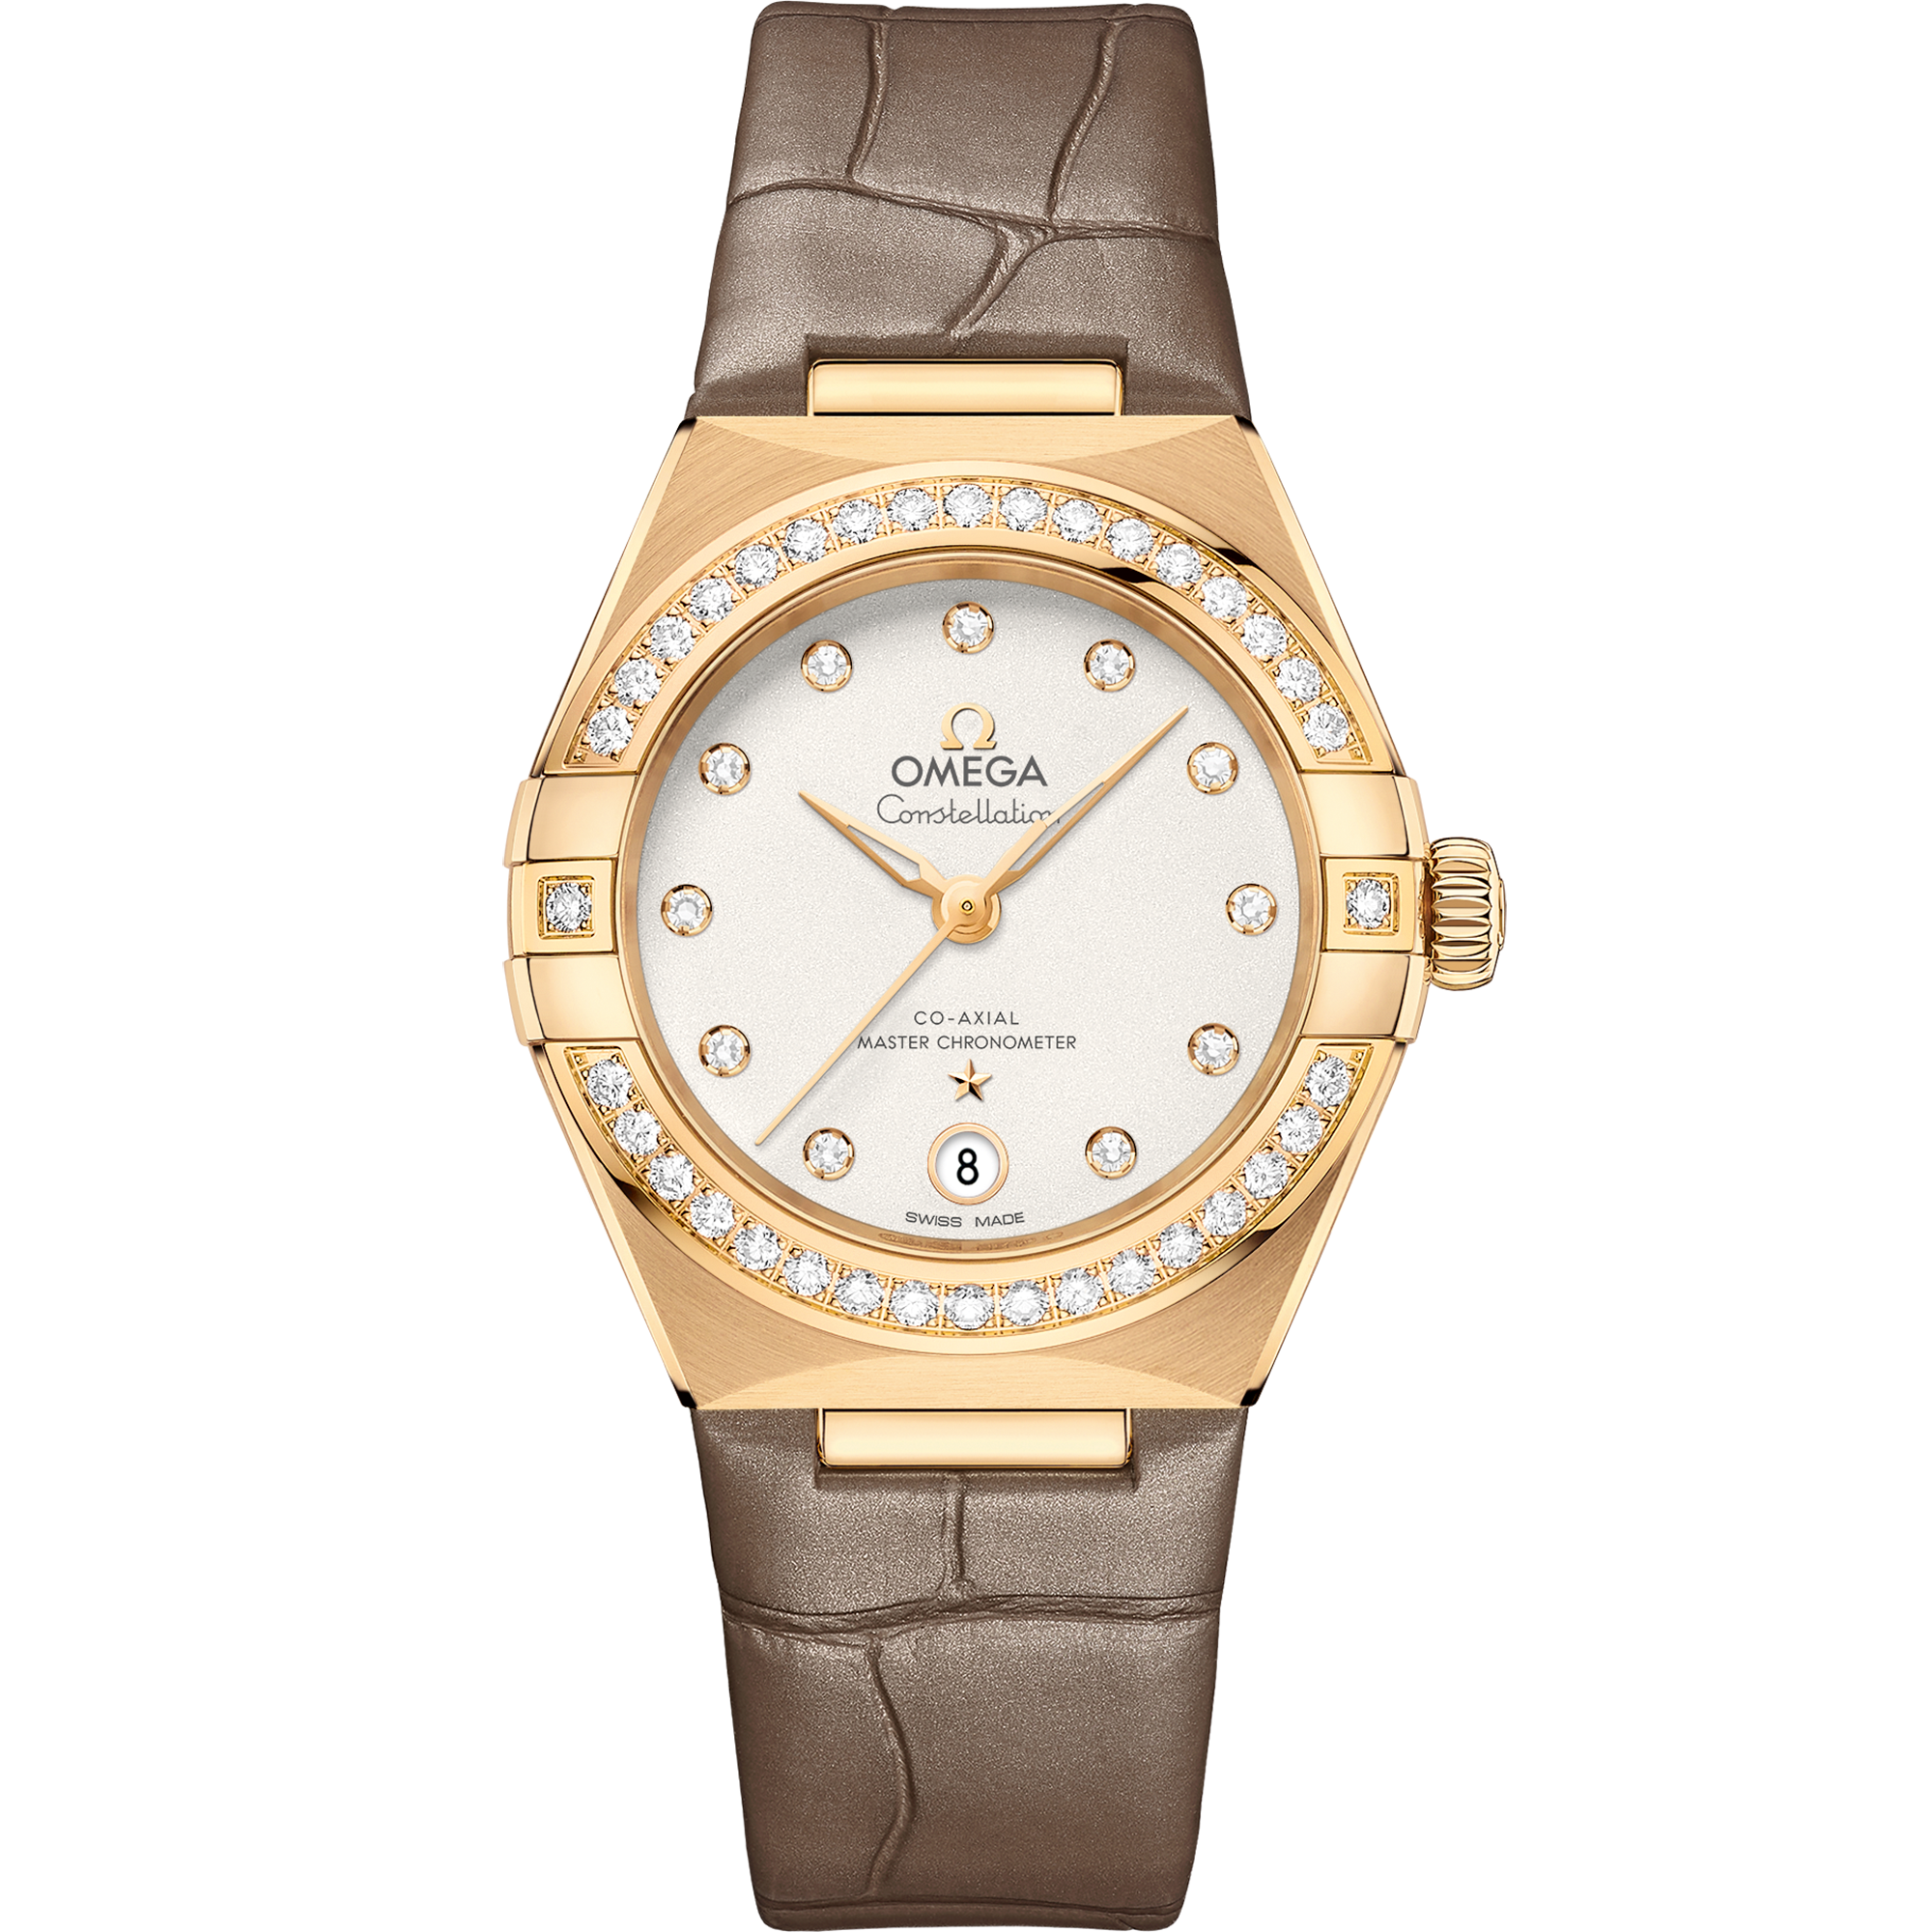 Constellation 29 mm, yellow gold on leather strap - 131.58.29.20.52.001